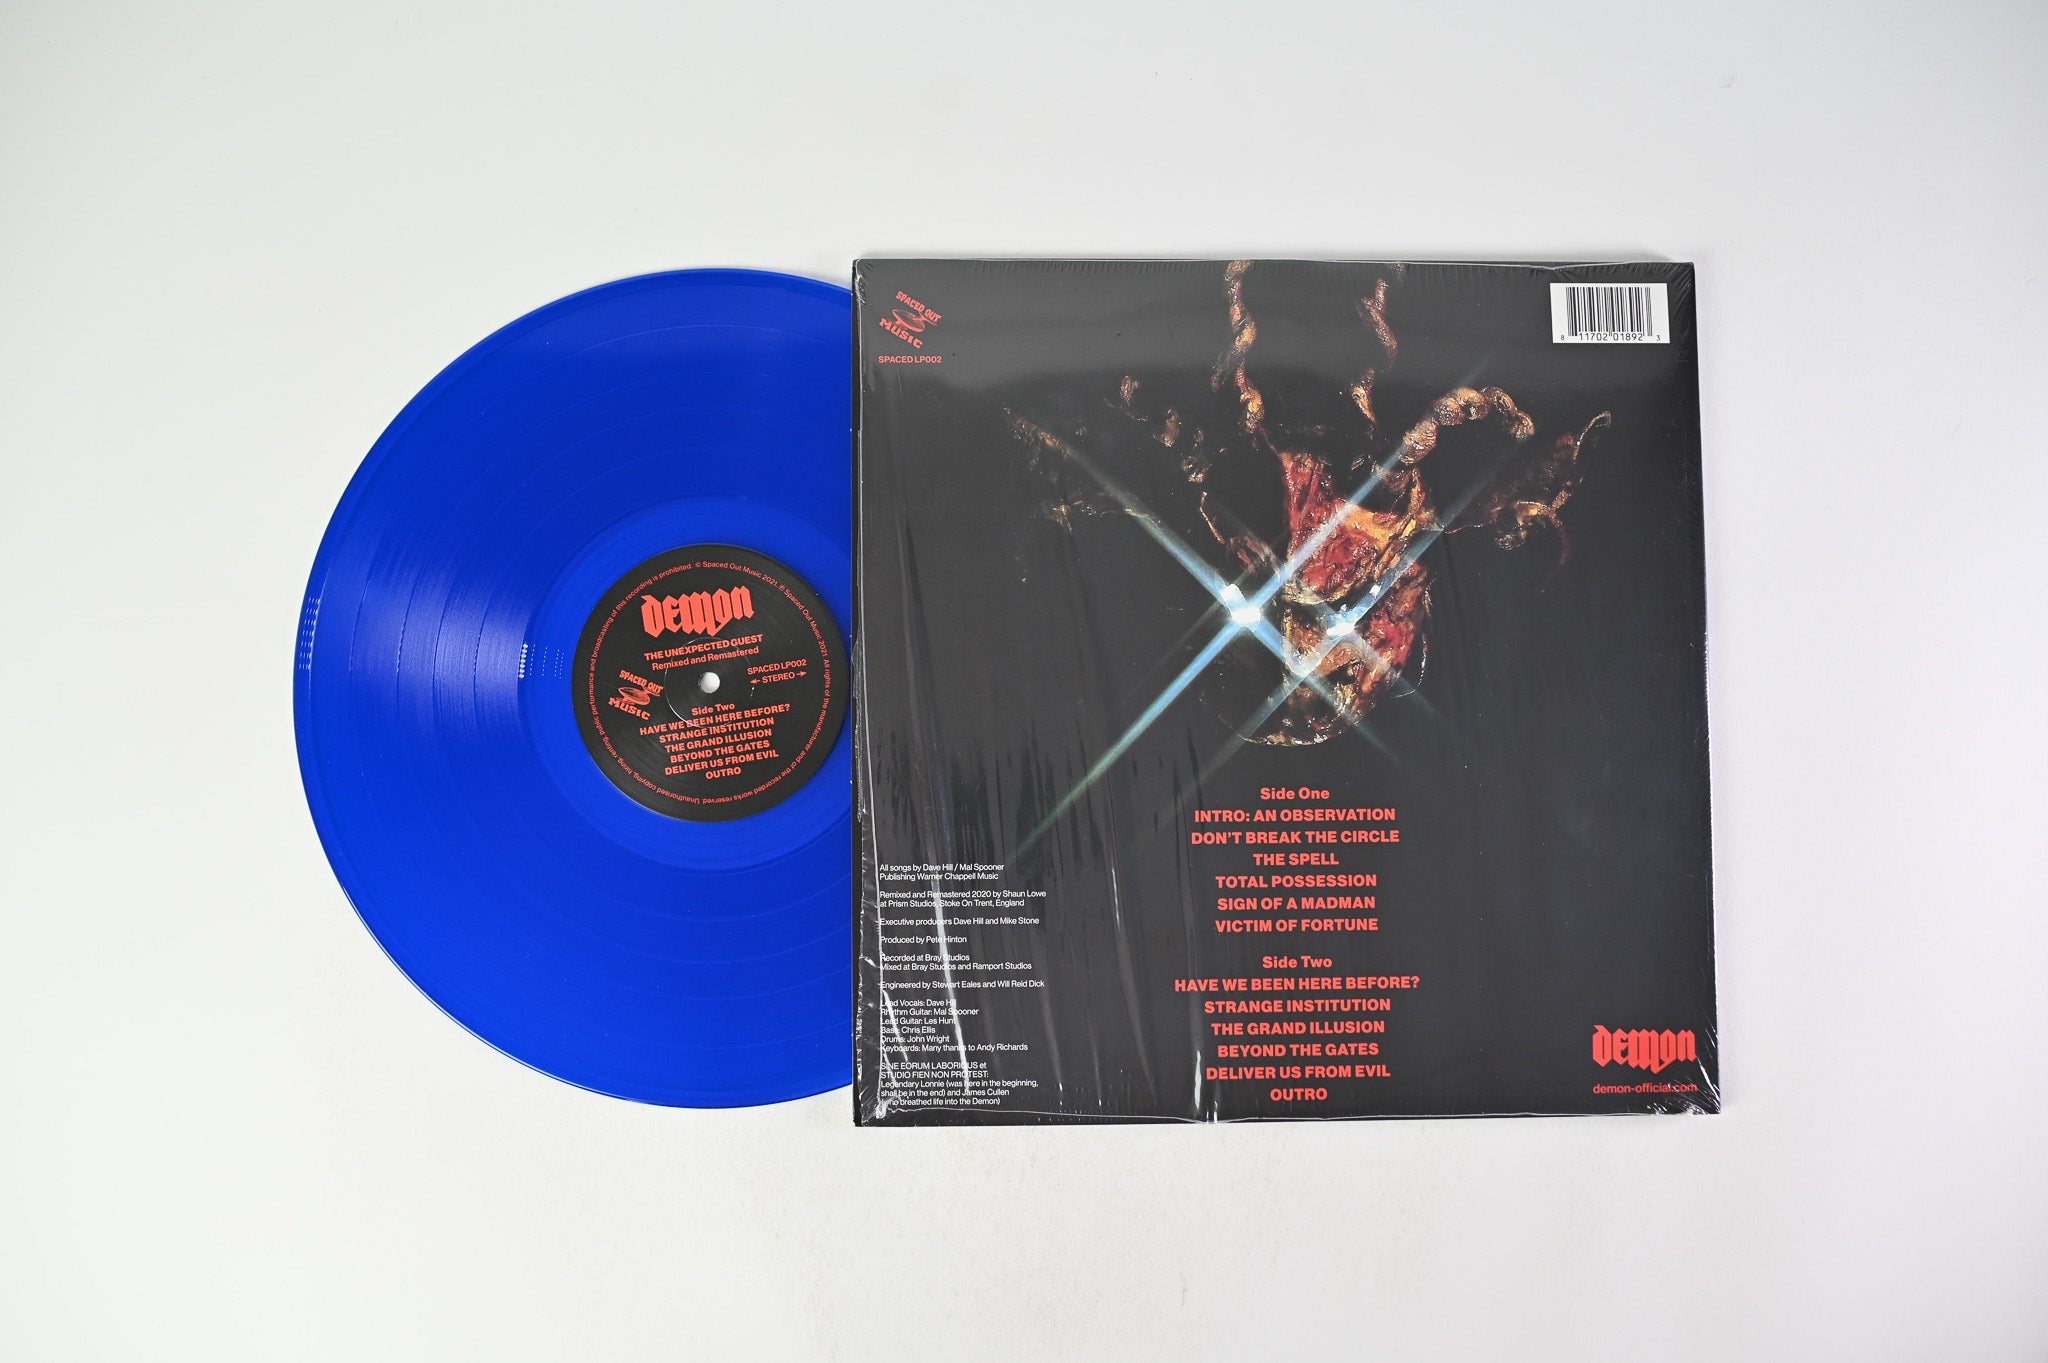 Demon - The Unexpected Guest: Remixed And Remastered on Spaced Out Blue Vinyl Reissue